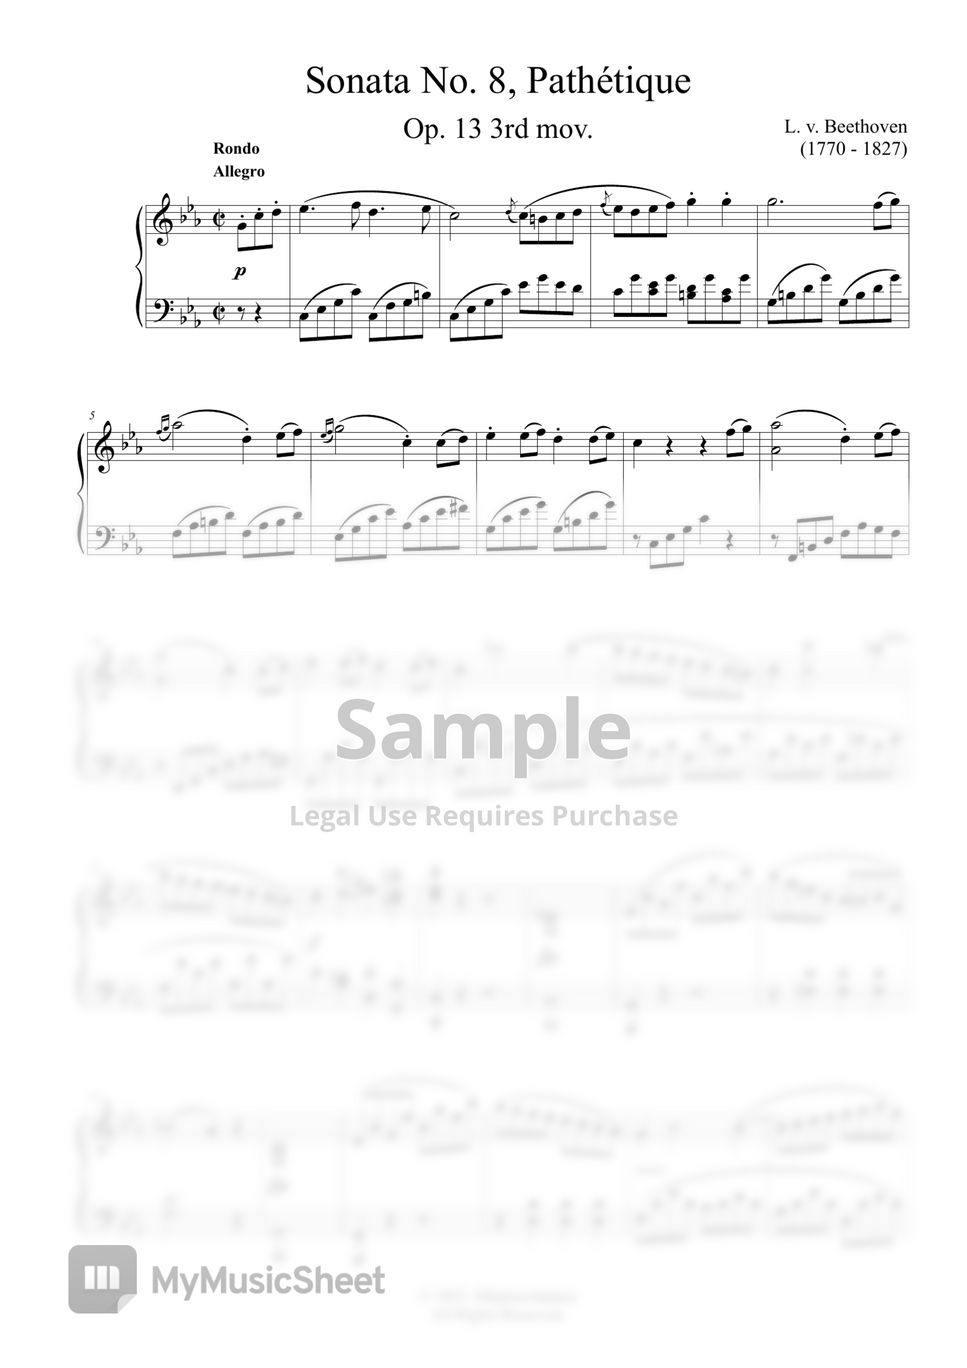 L.V.Beethoven - Pathetique Beethoven 3rd movement by MyMusicSheet Official